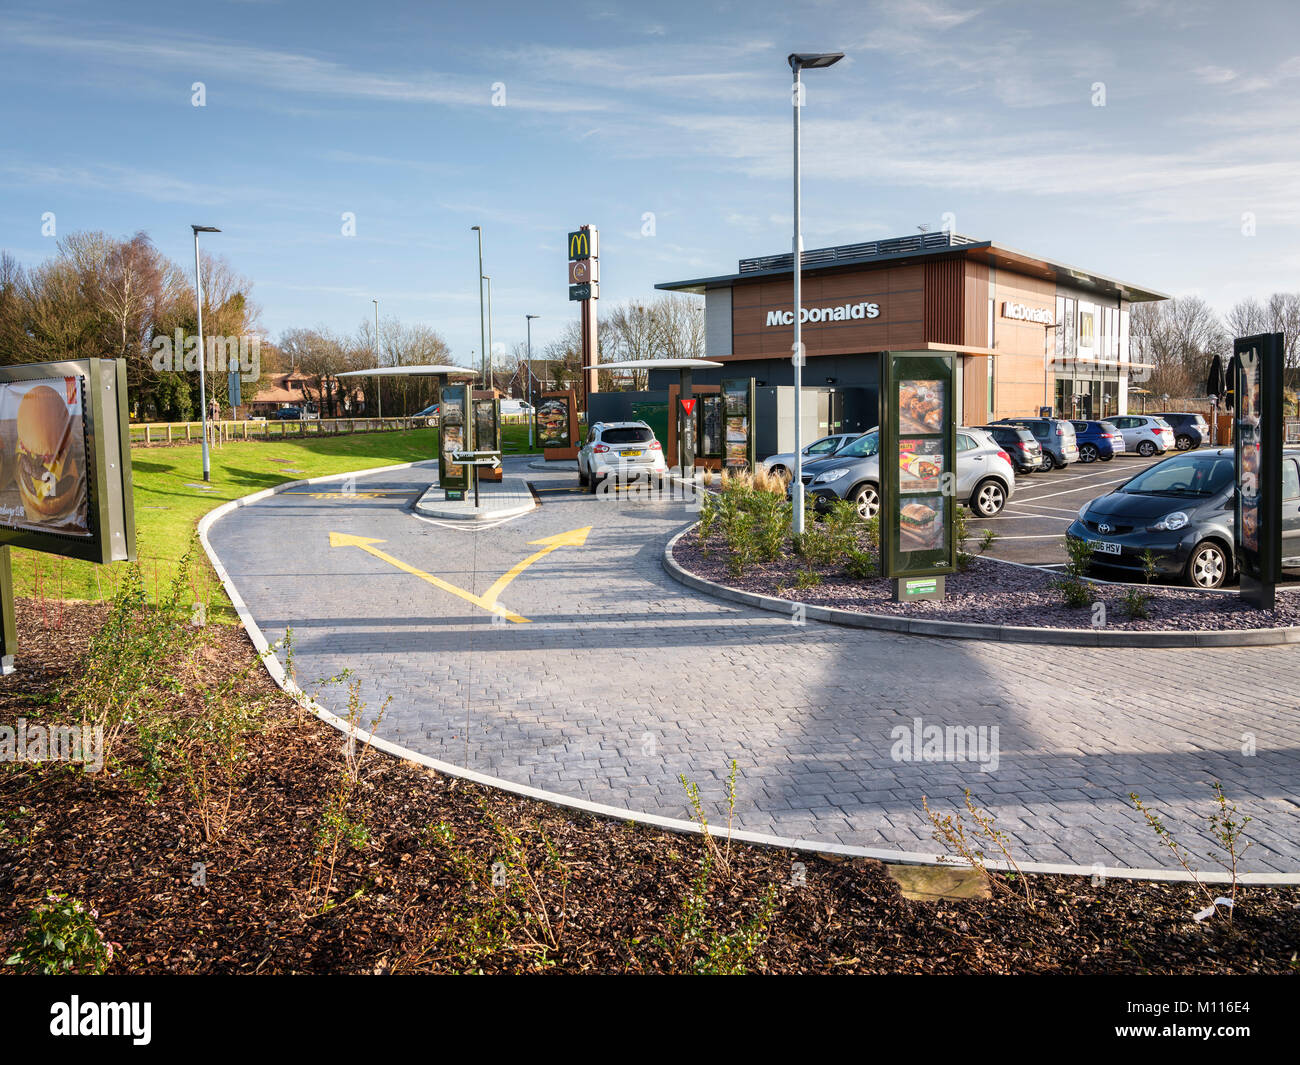 A McDonalds drive through restaurant near Portsmouth, Hampshire UK. Editorial use only. Stock Photo